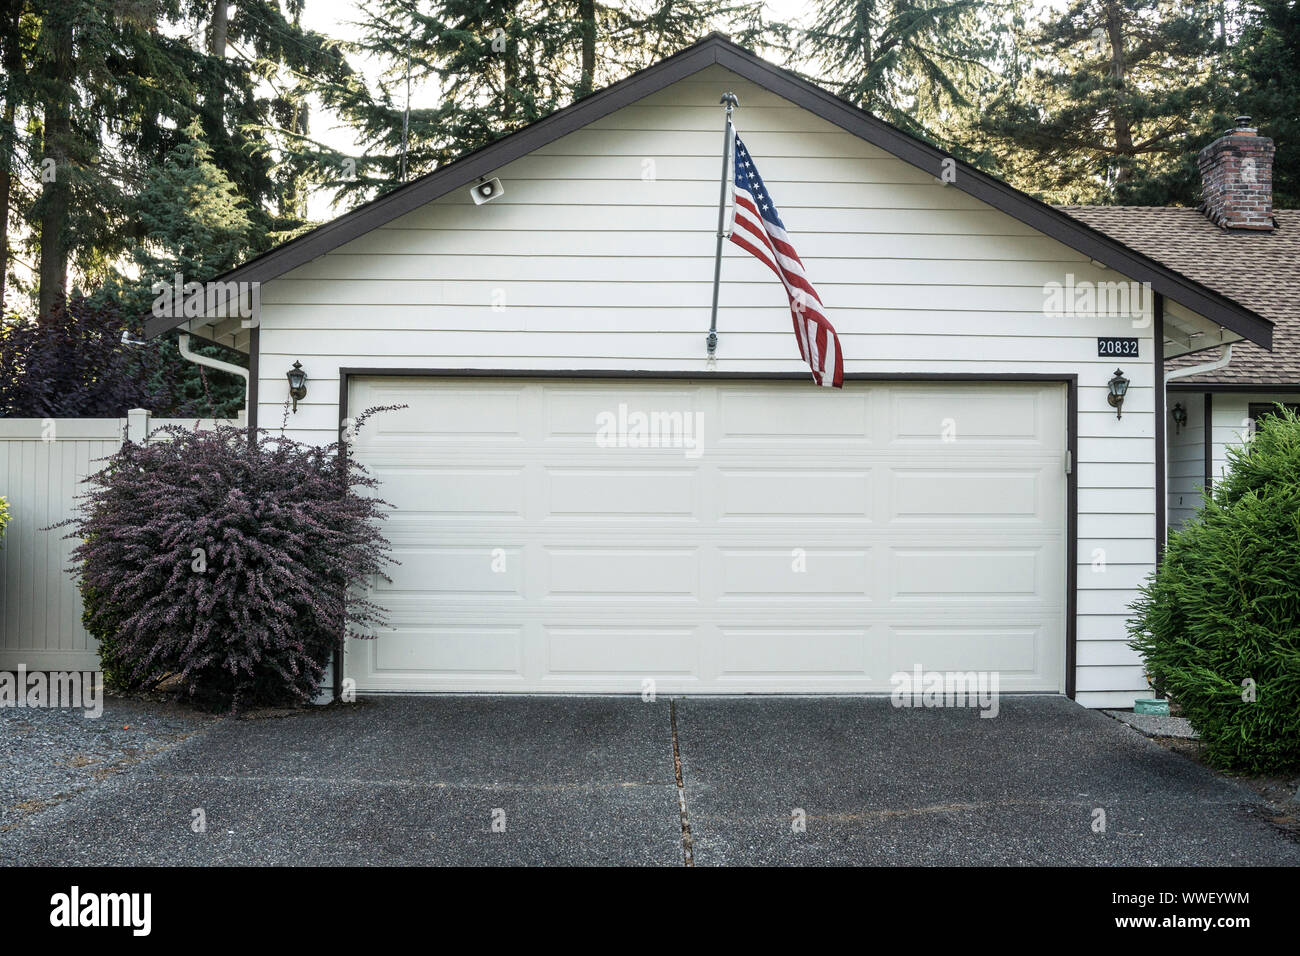 trim white suburban garage with neat horizontal wood siding trimmed in dark brown with American flag centered above the door waving in a light breeze Stock Photo